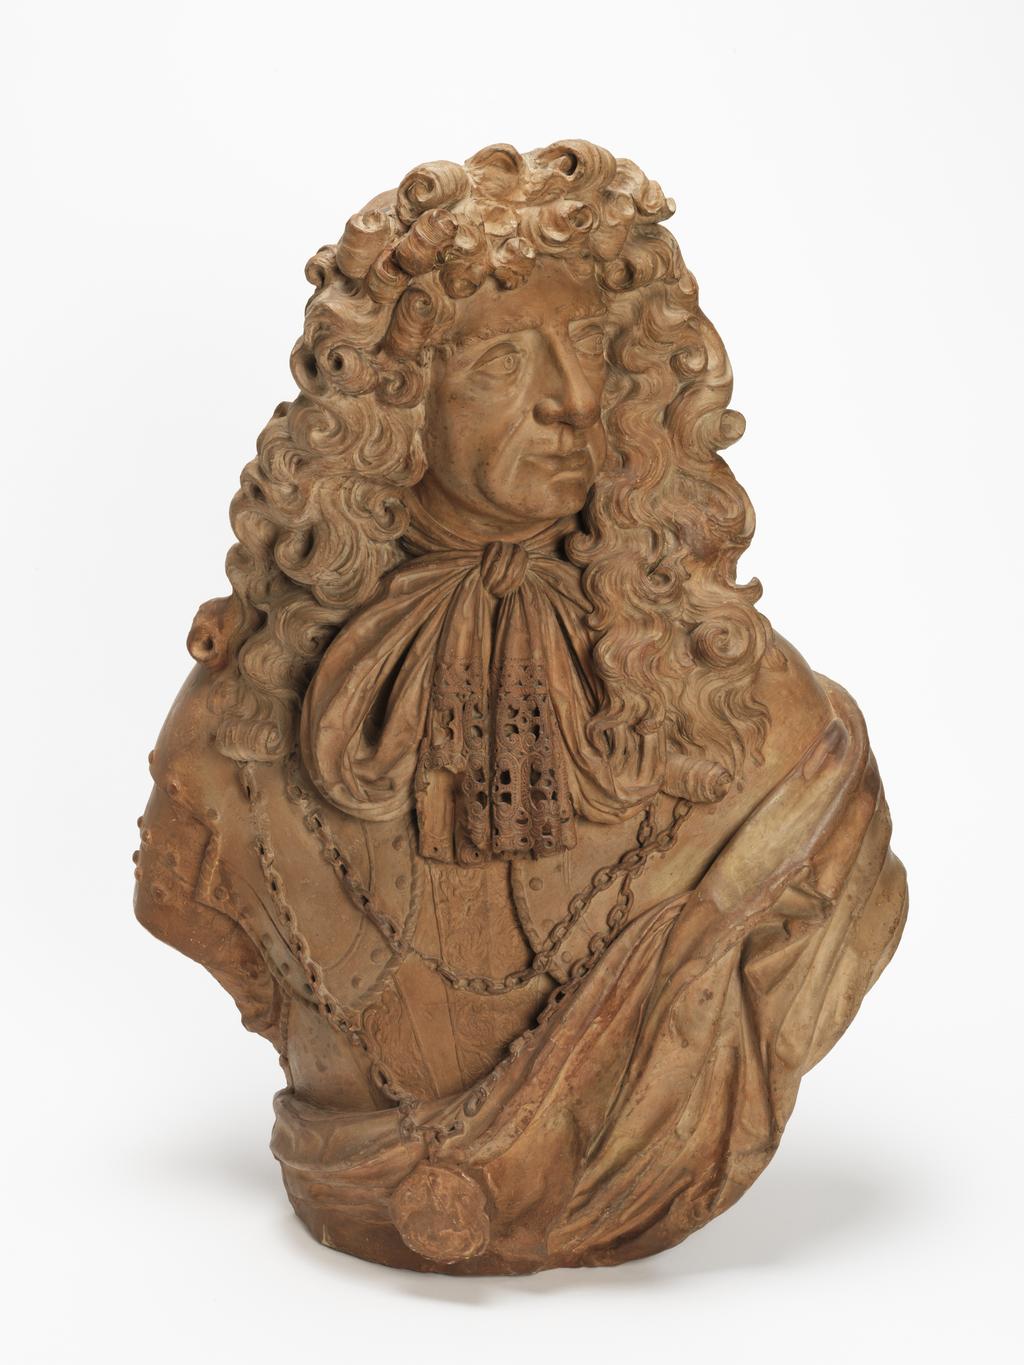 An image of Sculpture/Bust. King Charles II (1630-1685). Bushnell, John (British, c.1606-1701). Terracotta, height 78.5 cm, circa 1678. Baroque. The King's head is turned to the front, facing and looking half-right. He has a small moustache and a long, curling periwig, falling over both shoulders. He wears armour, with a double chain holding the Garter medallion of St George, a lace trimmed cravat tied in a bow, and a cloak draped over his left shoulder.